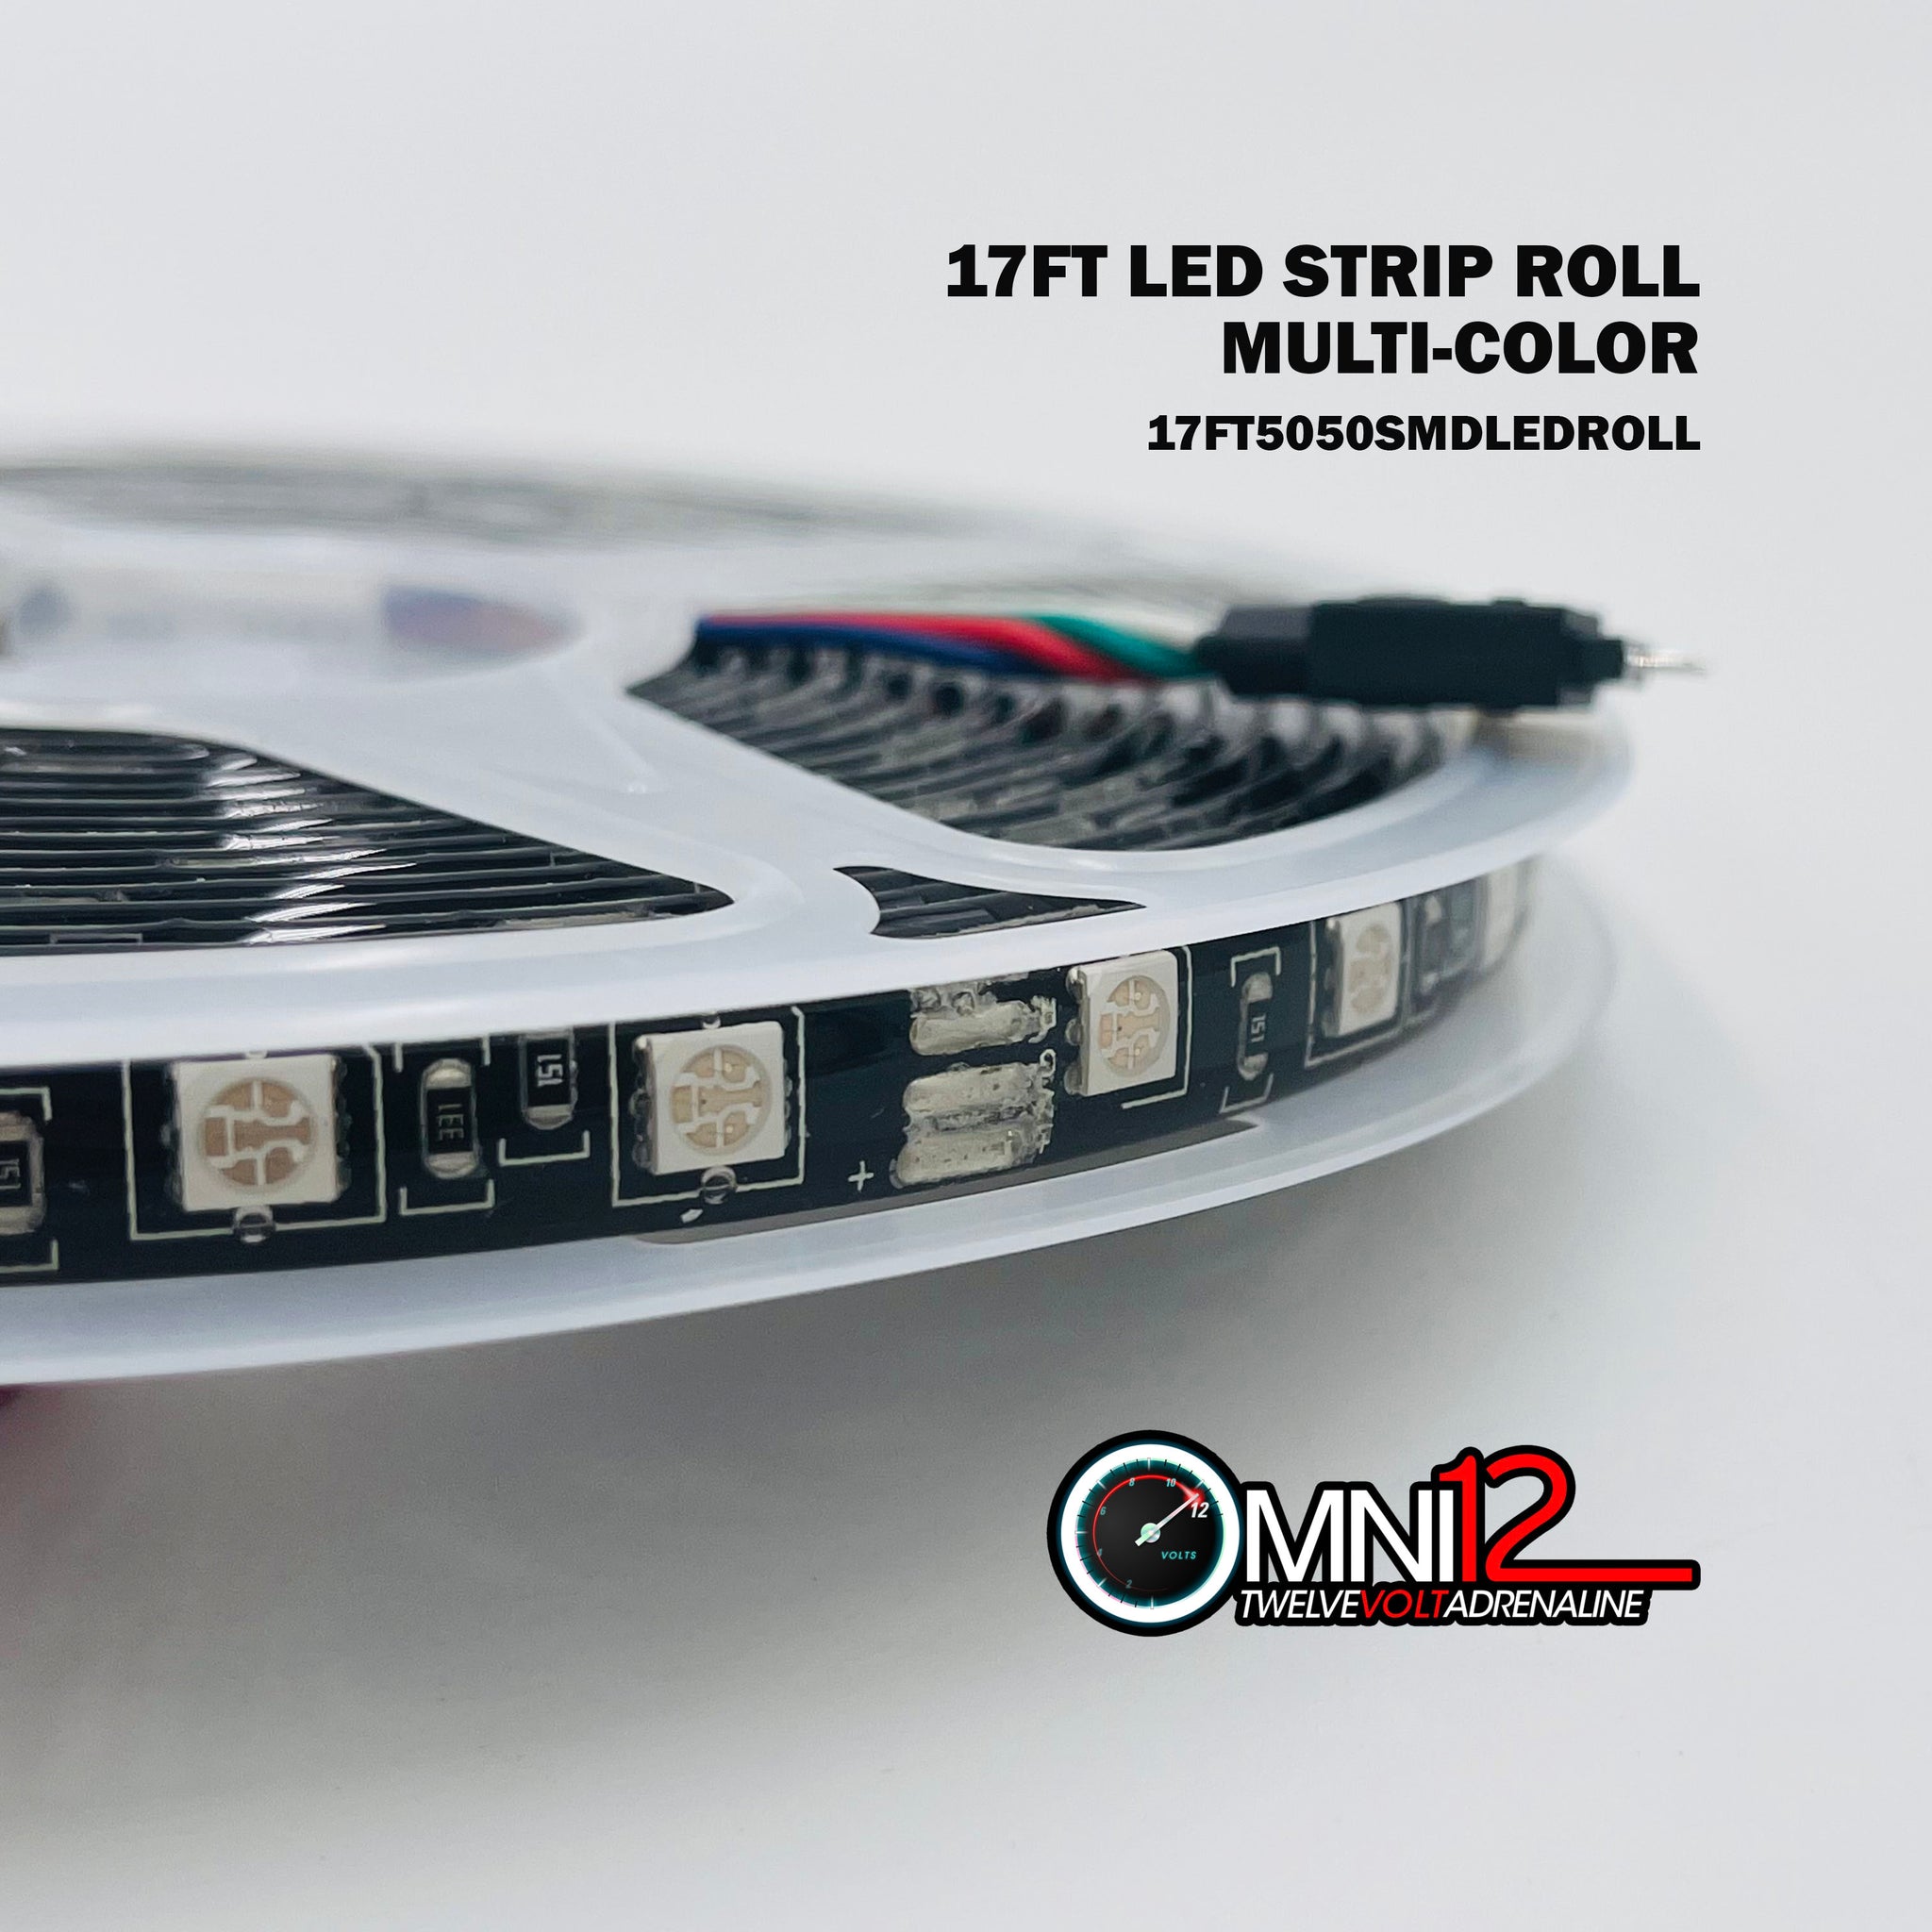 LED Strips Hight Density SMD LED 17FT Rolled Flat Flexible Strips with Cut Marks with Remote RGB Multi-color Different Patterns